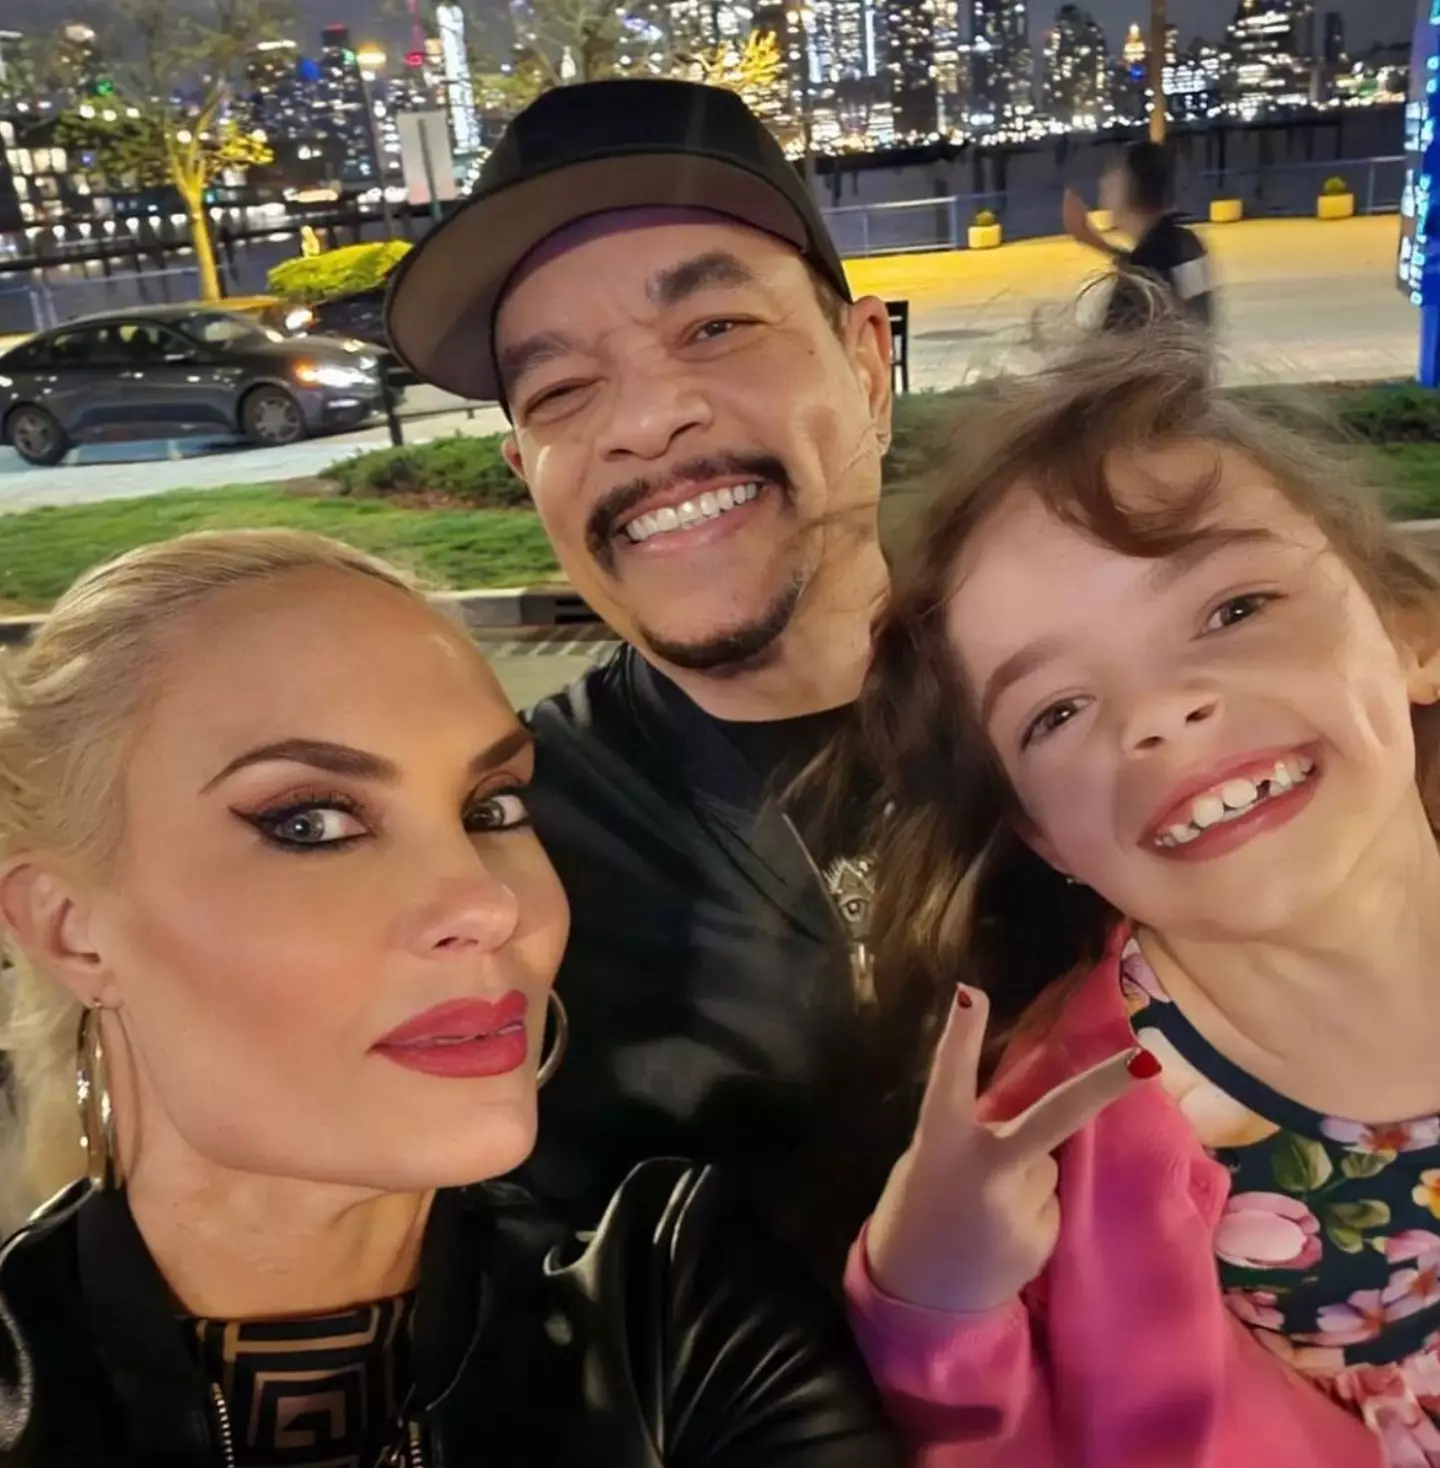 Ice-T says his youngest daughter still sleeps with him and his wife.